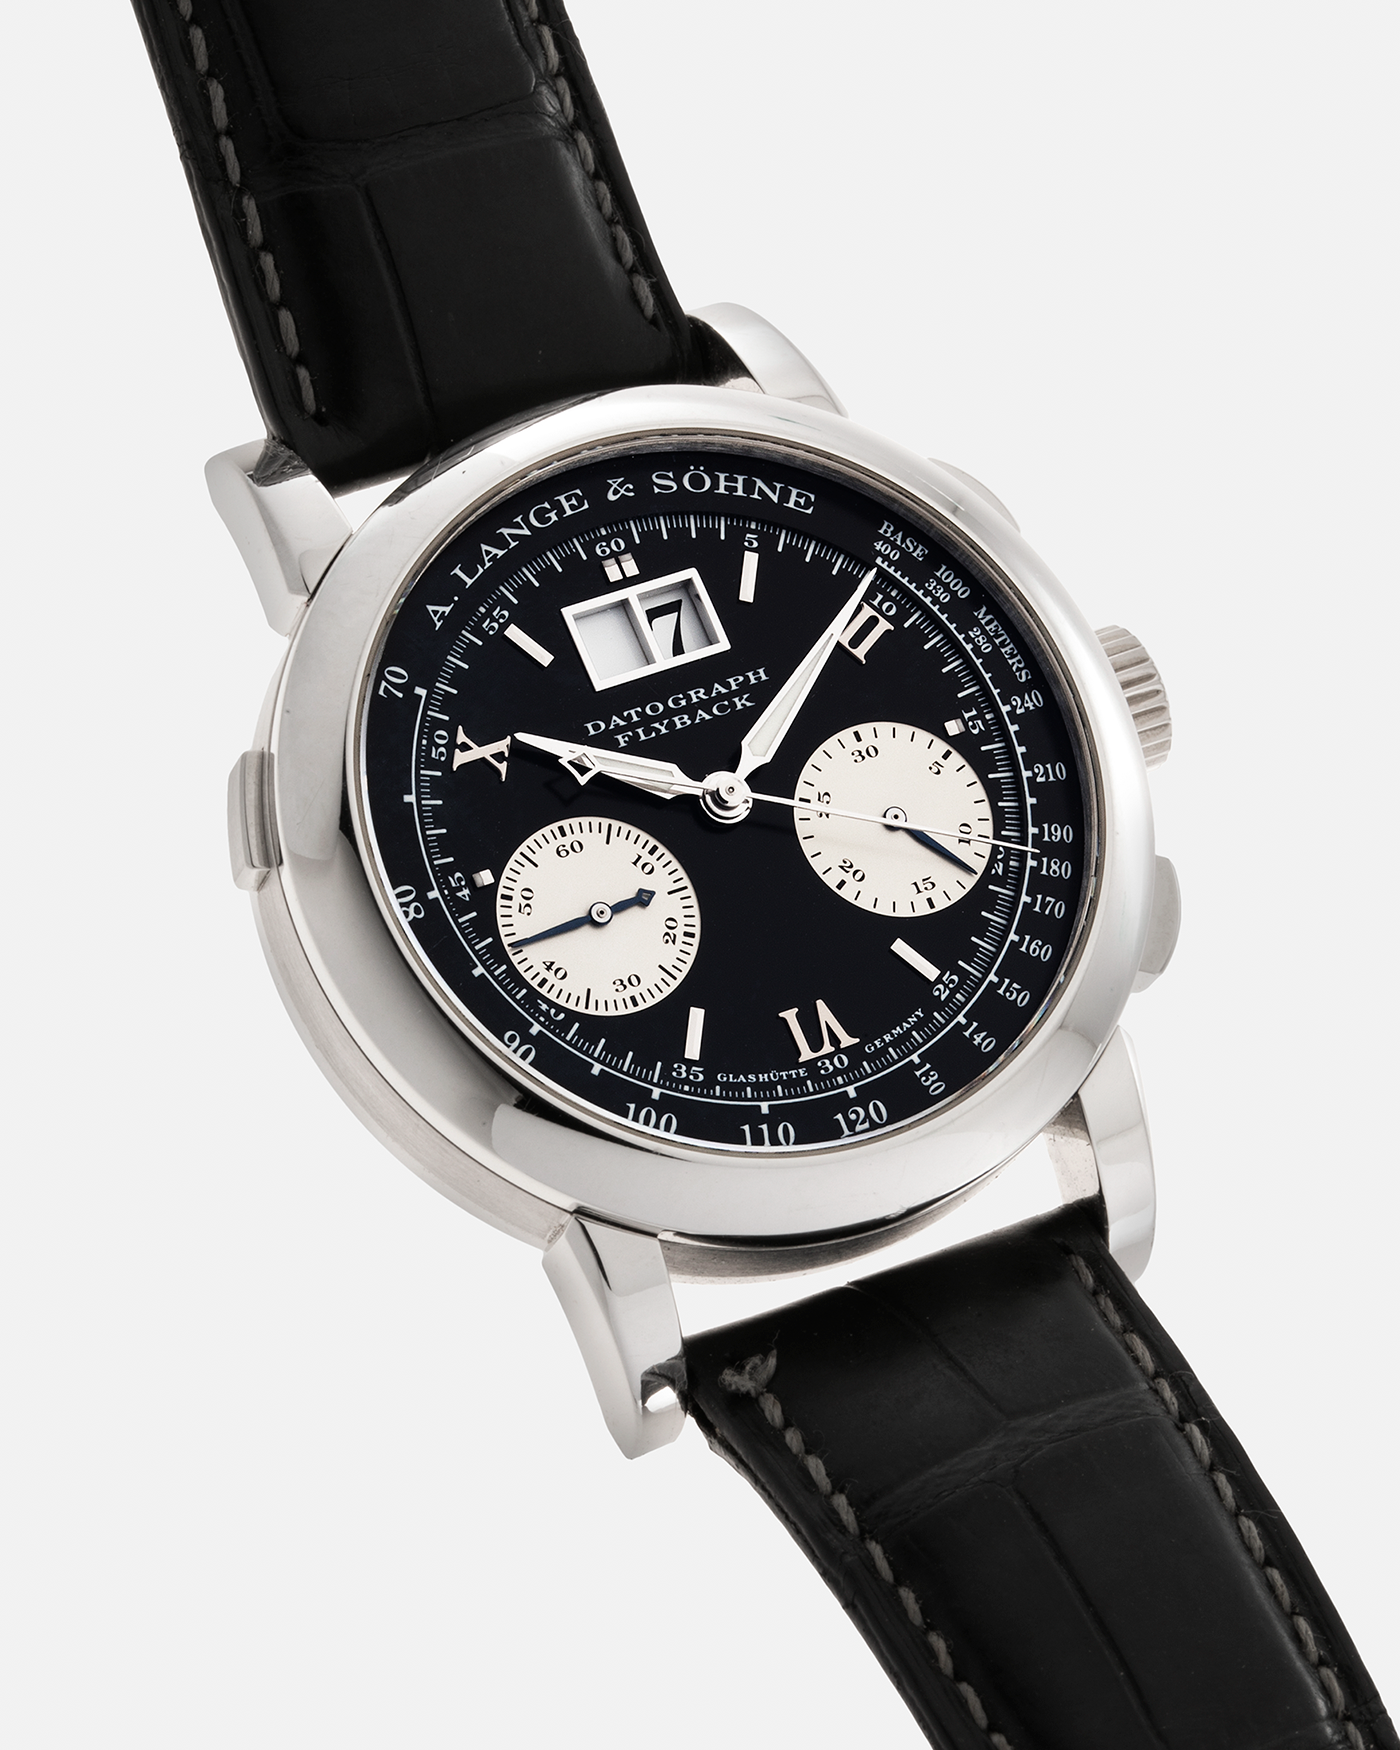 Brand: A. Lange & Söhne Year: 2007 Model: Datograph Reference Number: 403.035 Material: Platinum Movement: A. Lange & Söhne Cal. L951.1, Manual-Winding Case Diameter: 39mm Strap: A. Lange & Söhne Dark Grey Textured Calf with Signed Platinum Tang Buckle